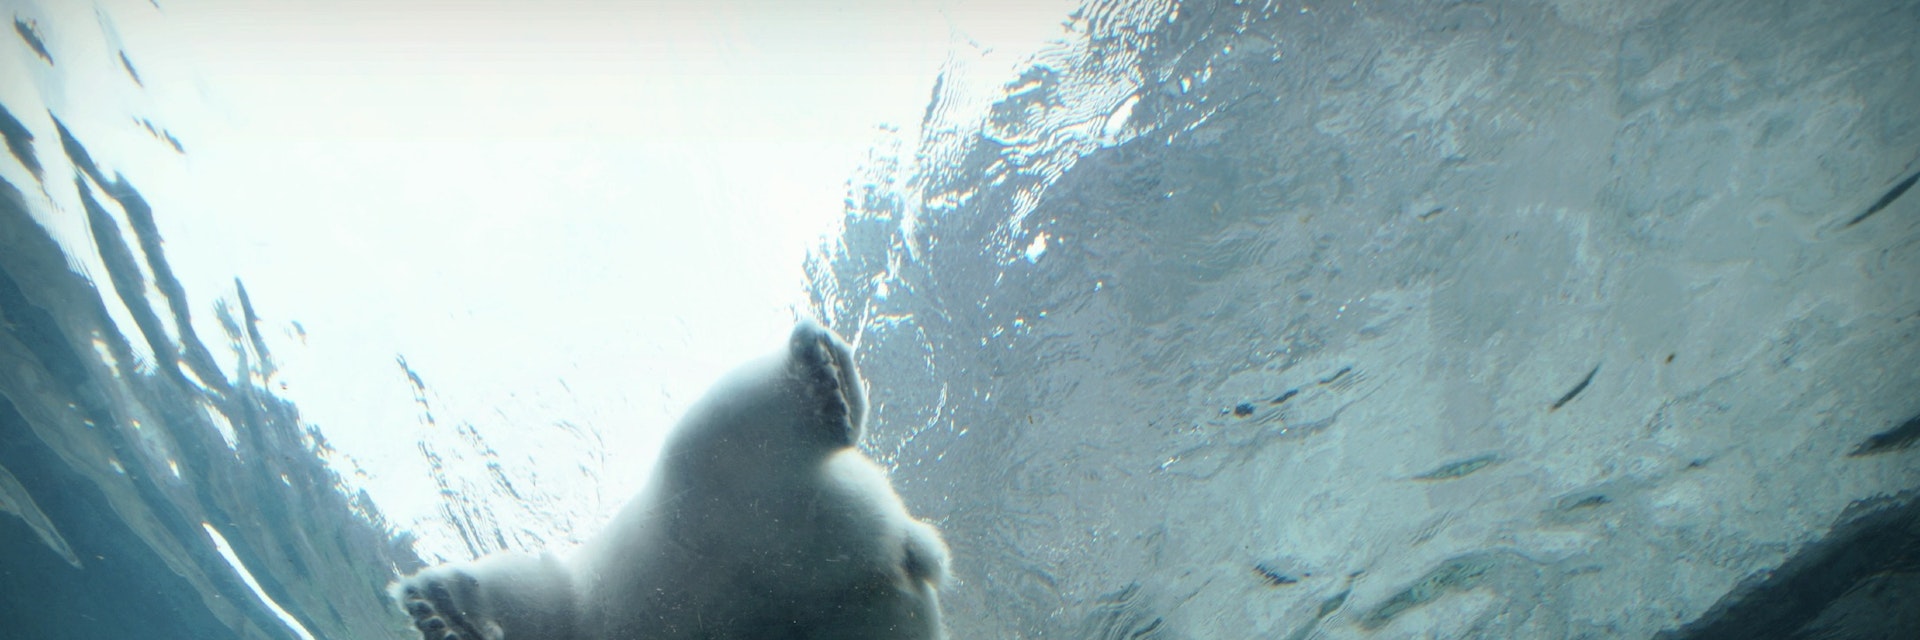 My mom and I had a great time watching the 7 polar bears at our new "Journey to Churchill" area at the Assiniboine Zoo. This was taken in one of the underwater tunnels. Kaska, the polar bear, is happily swimming around showing off her acrobatic moves and catching fish.